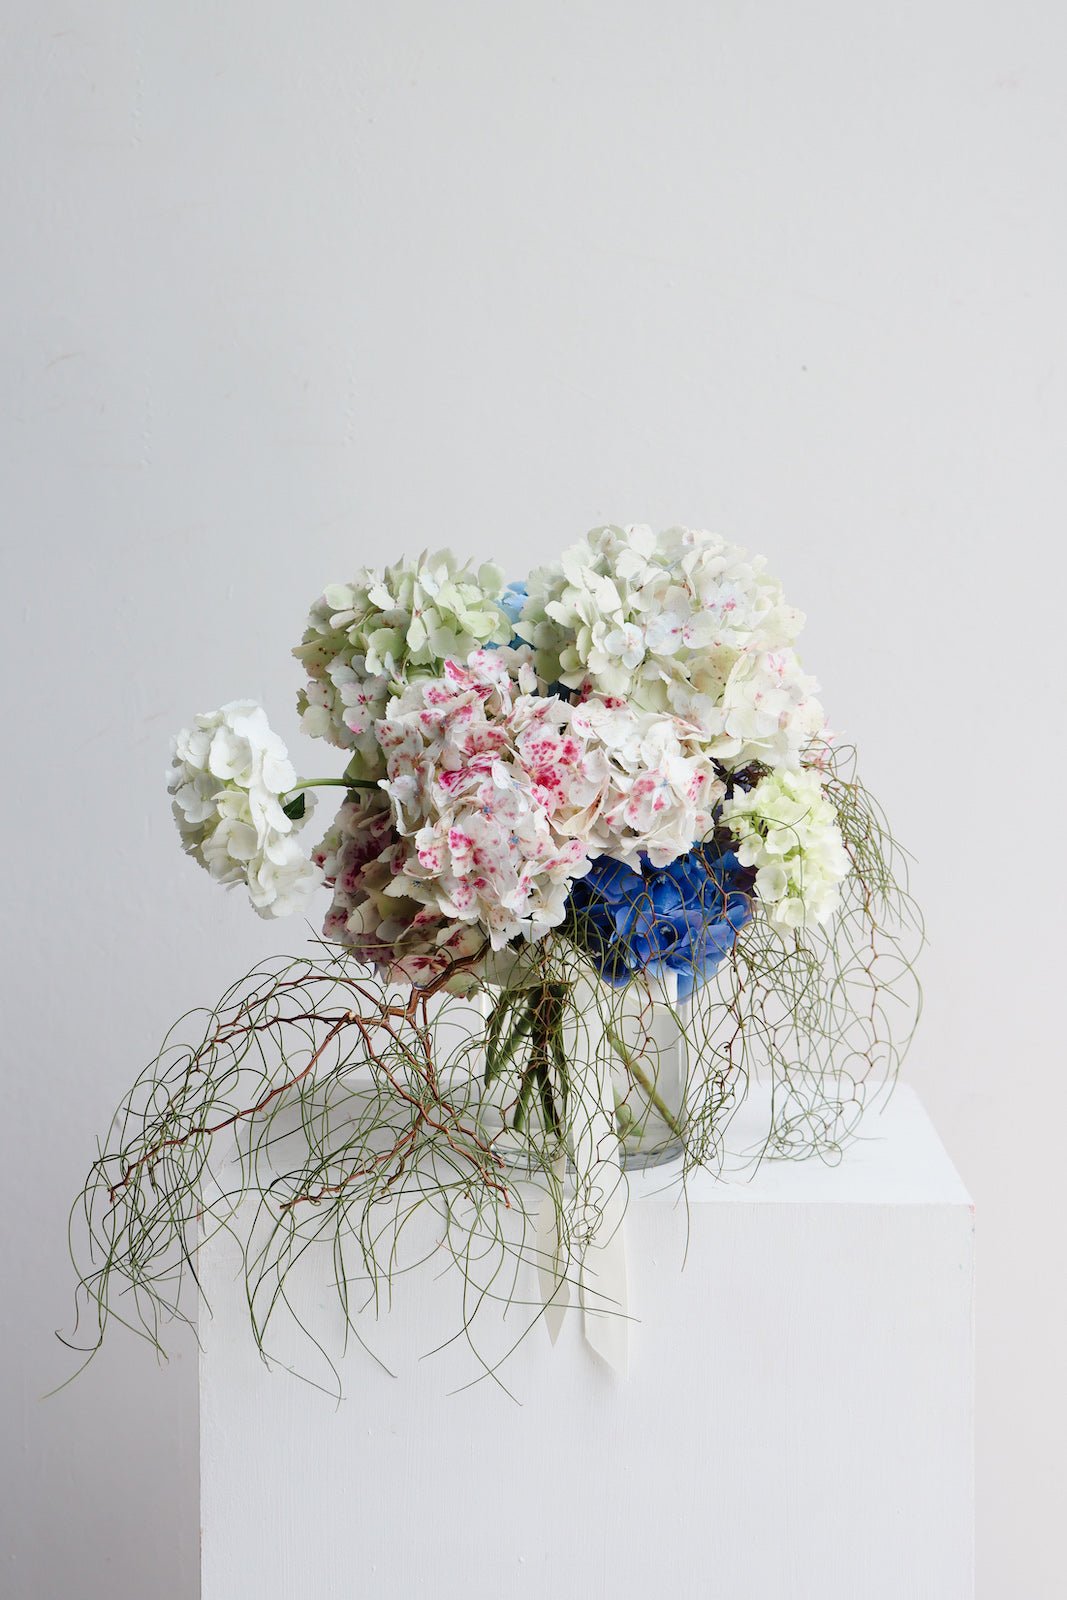 A vase arrangement of Blue, white and pink Hydrangea flowers with trailing acacia foliage. The arrangment is sitting on a white plinth in from of a white wall. 